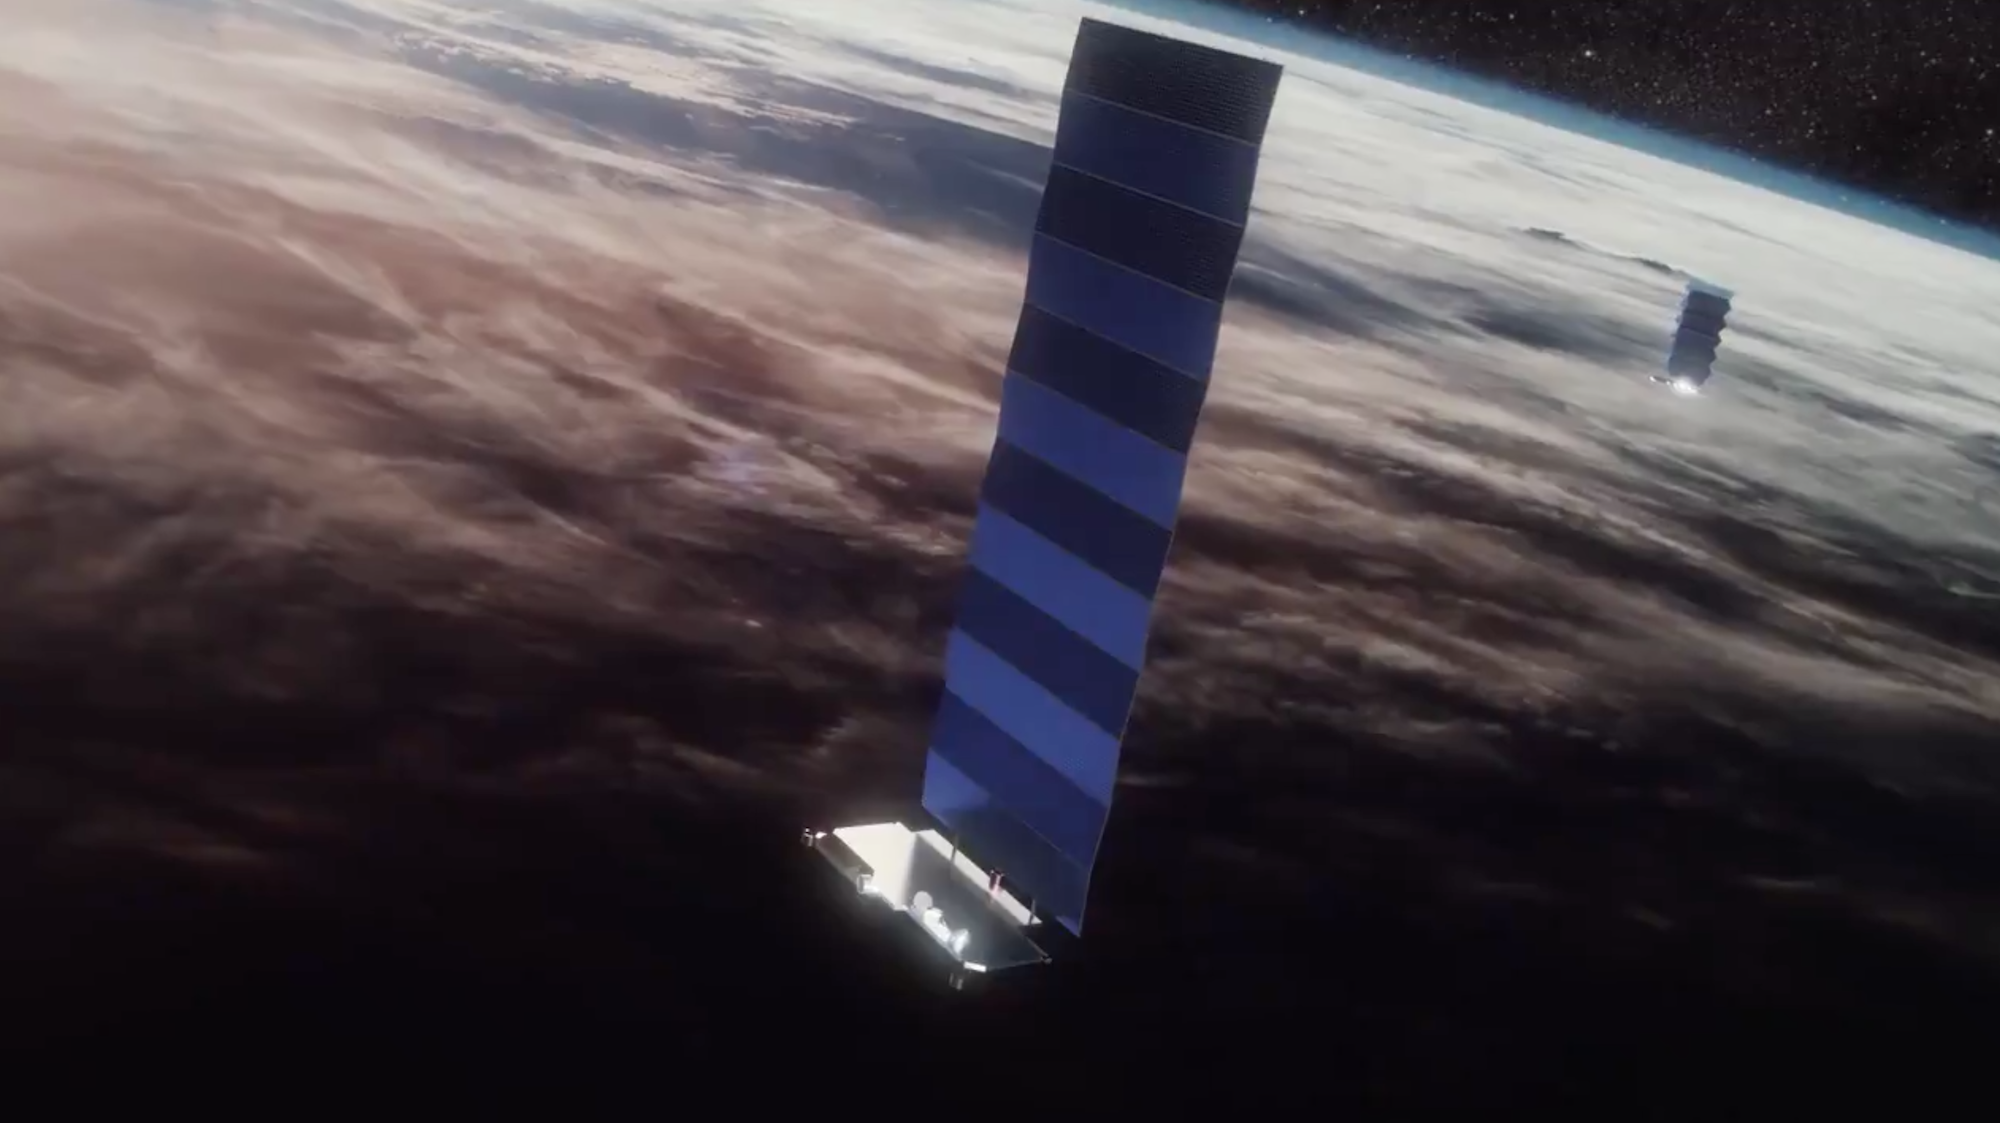 SpaceX is adding laser cross links to the Starlink polar satellites